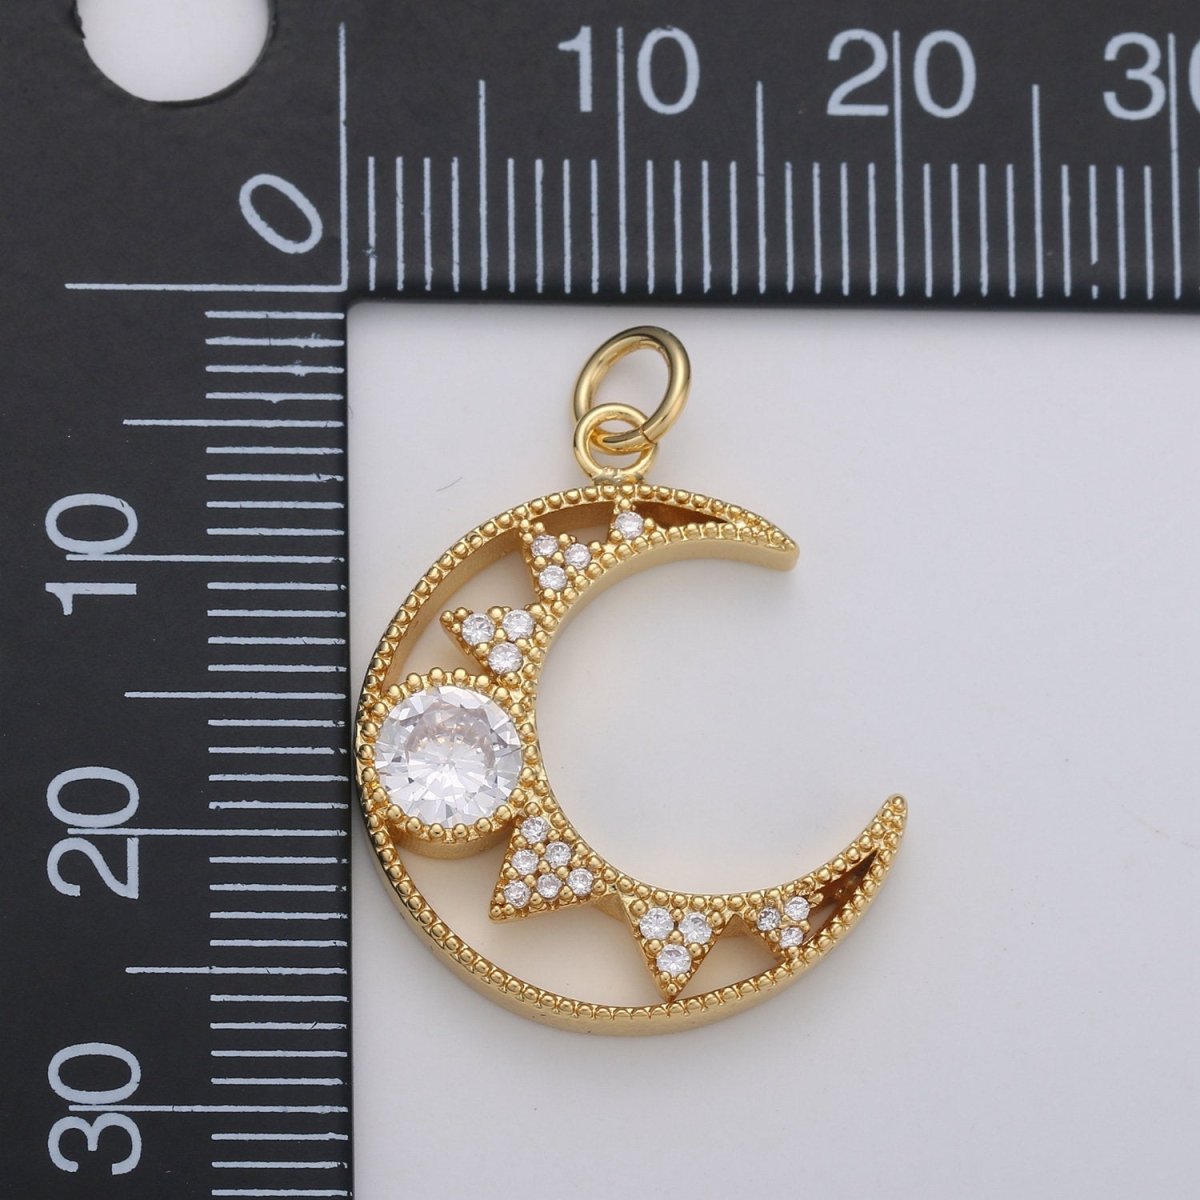 24k Gold Filled Micro Pave Crescent Moon Charm, Cubic Zirconia Moon Pendant Charm, Gold Filled Charm, For DIY Jewelry D-113 - DLUXCA